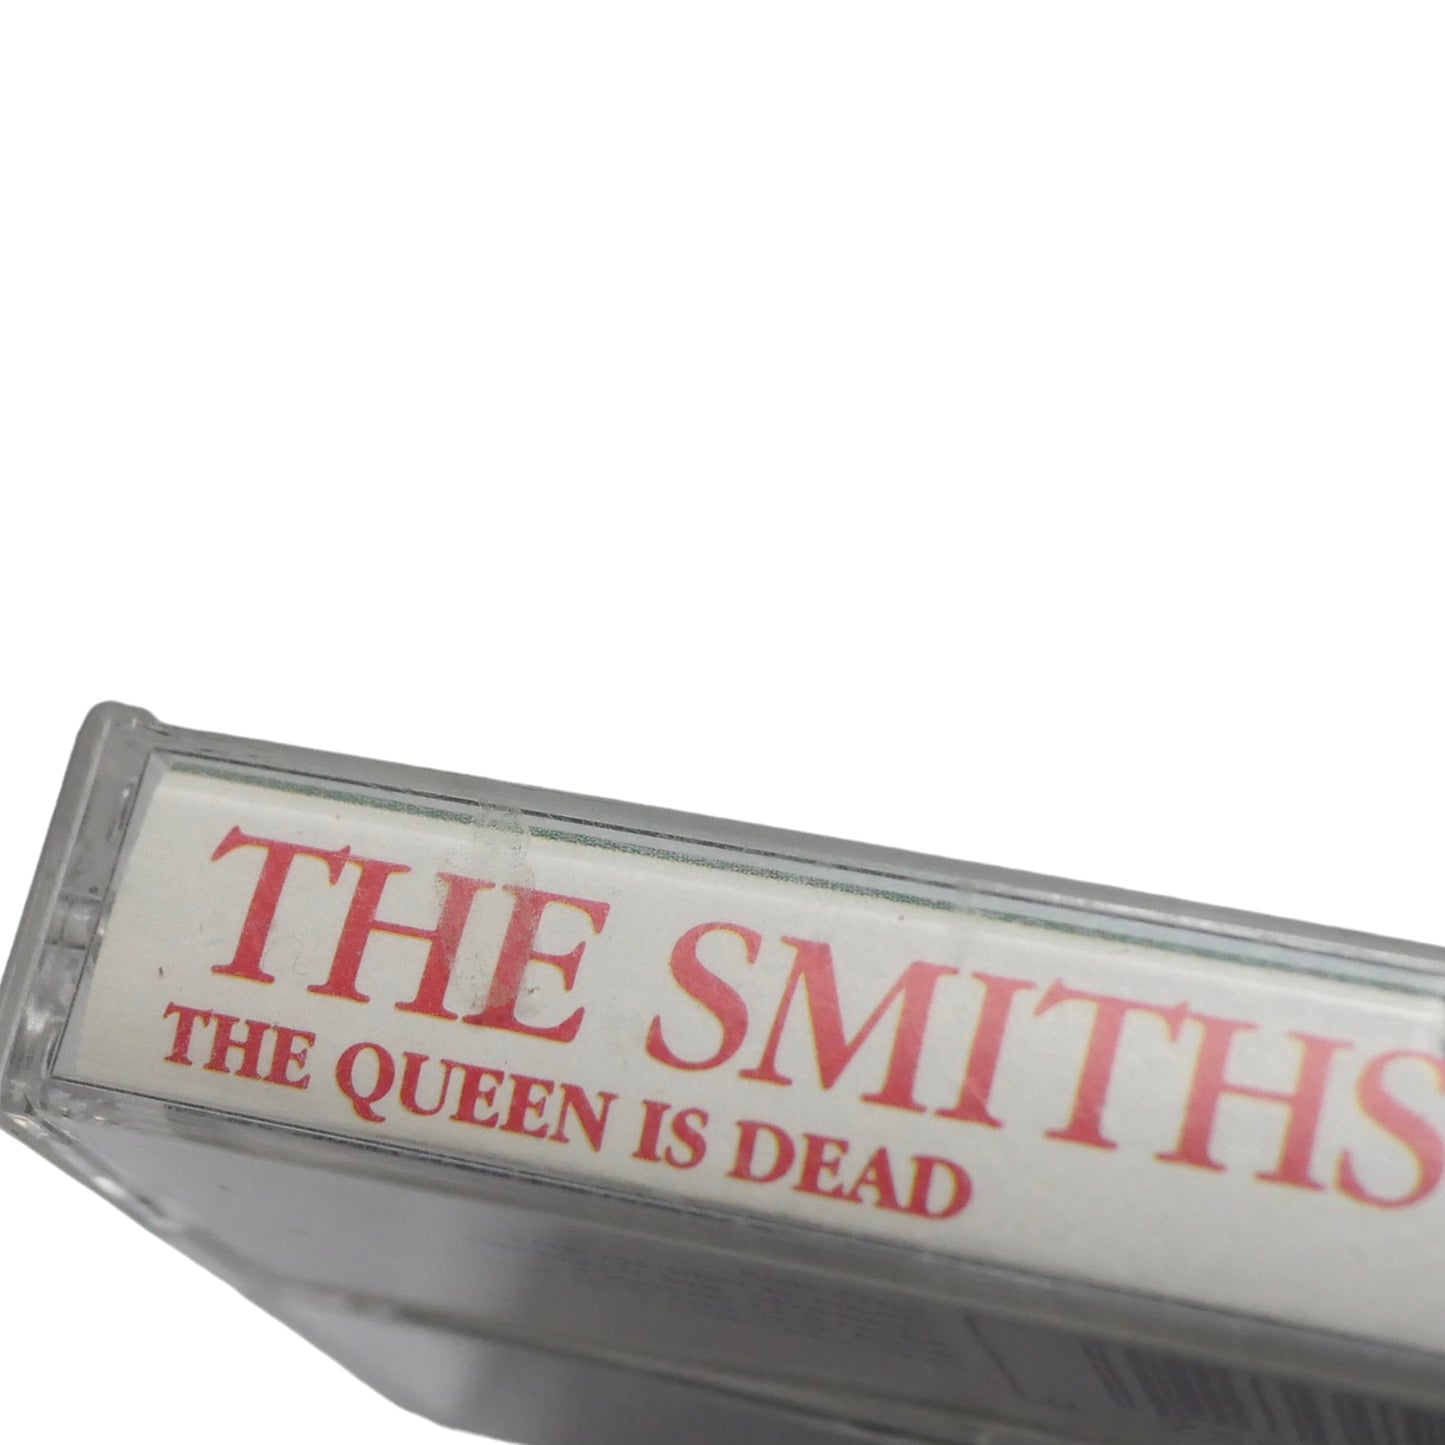 The Smiths - The Queen is Dead Cassette